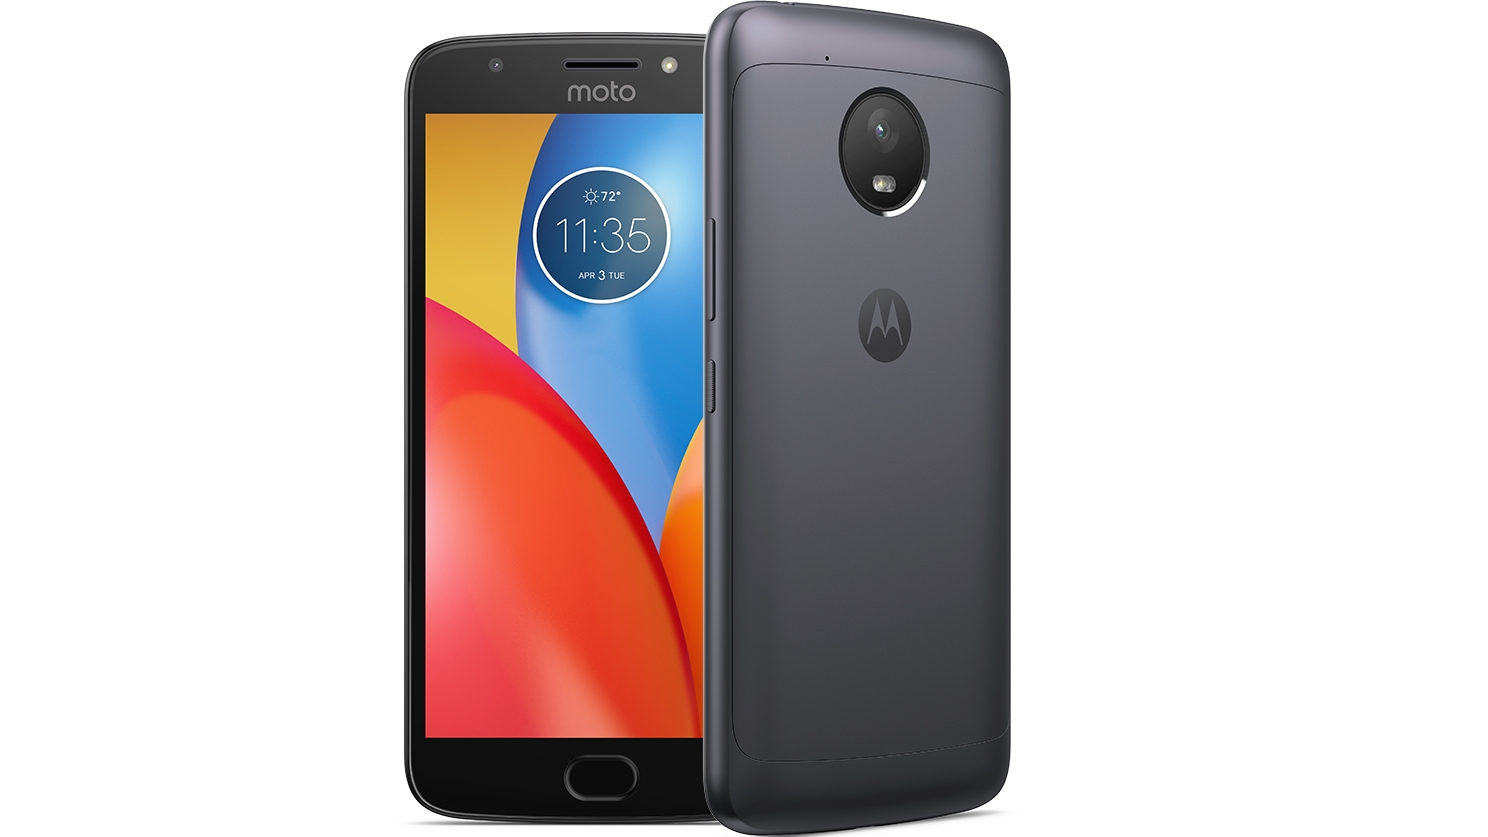 Motorola Moto E4 cell phone, front and back profiles